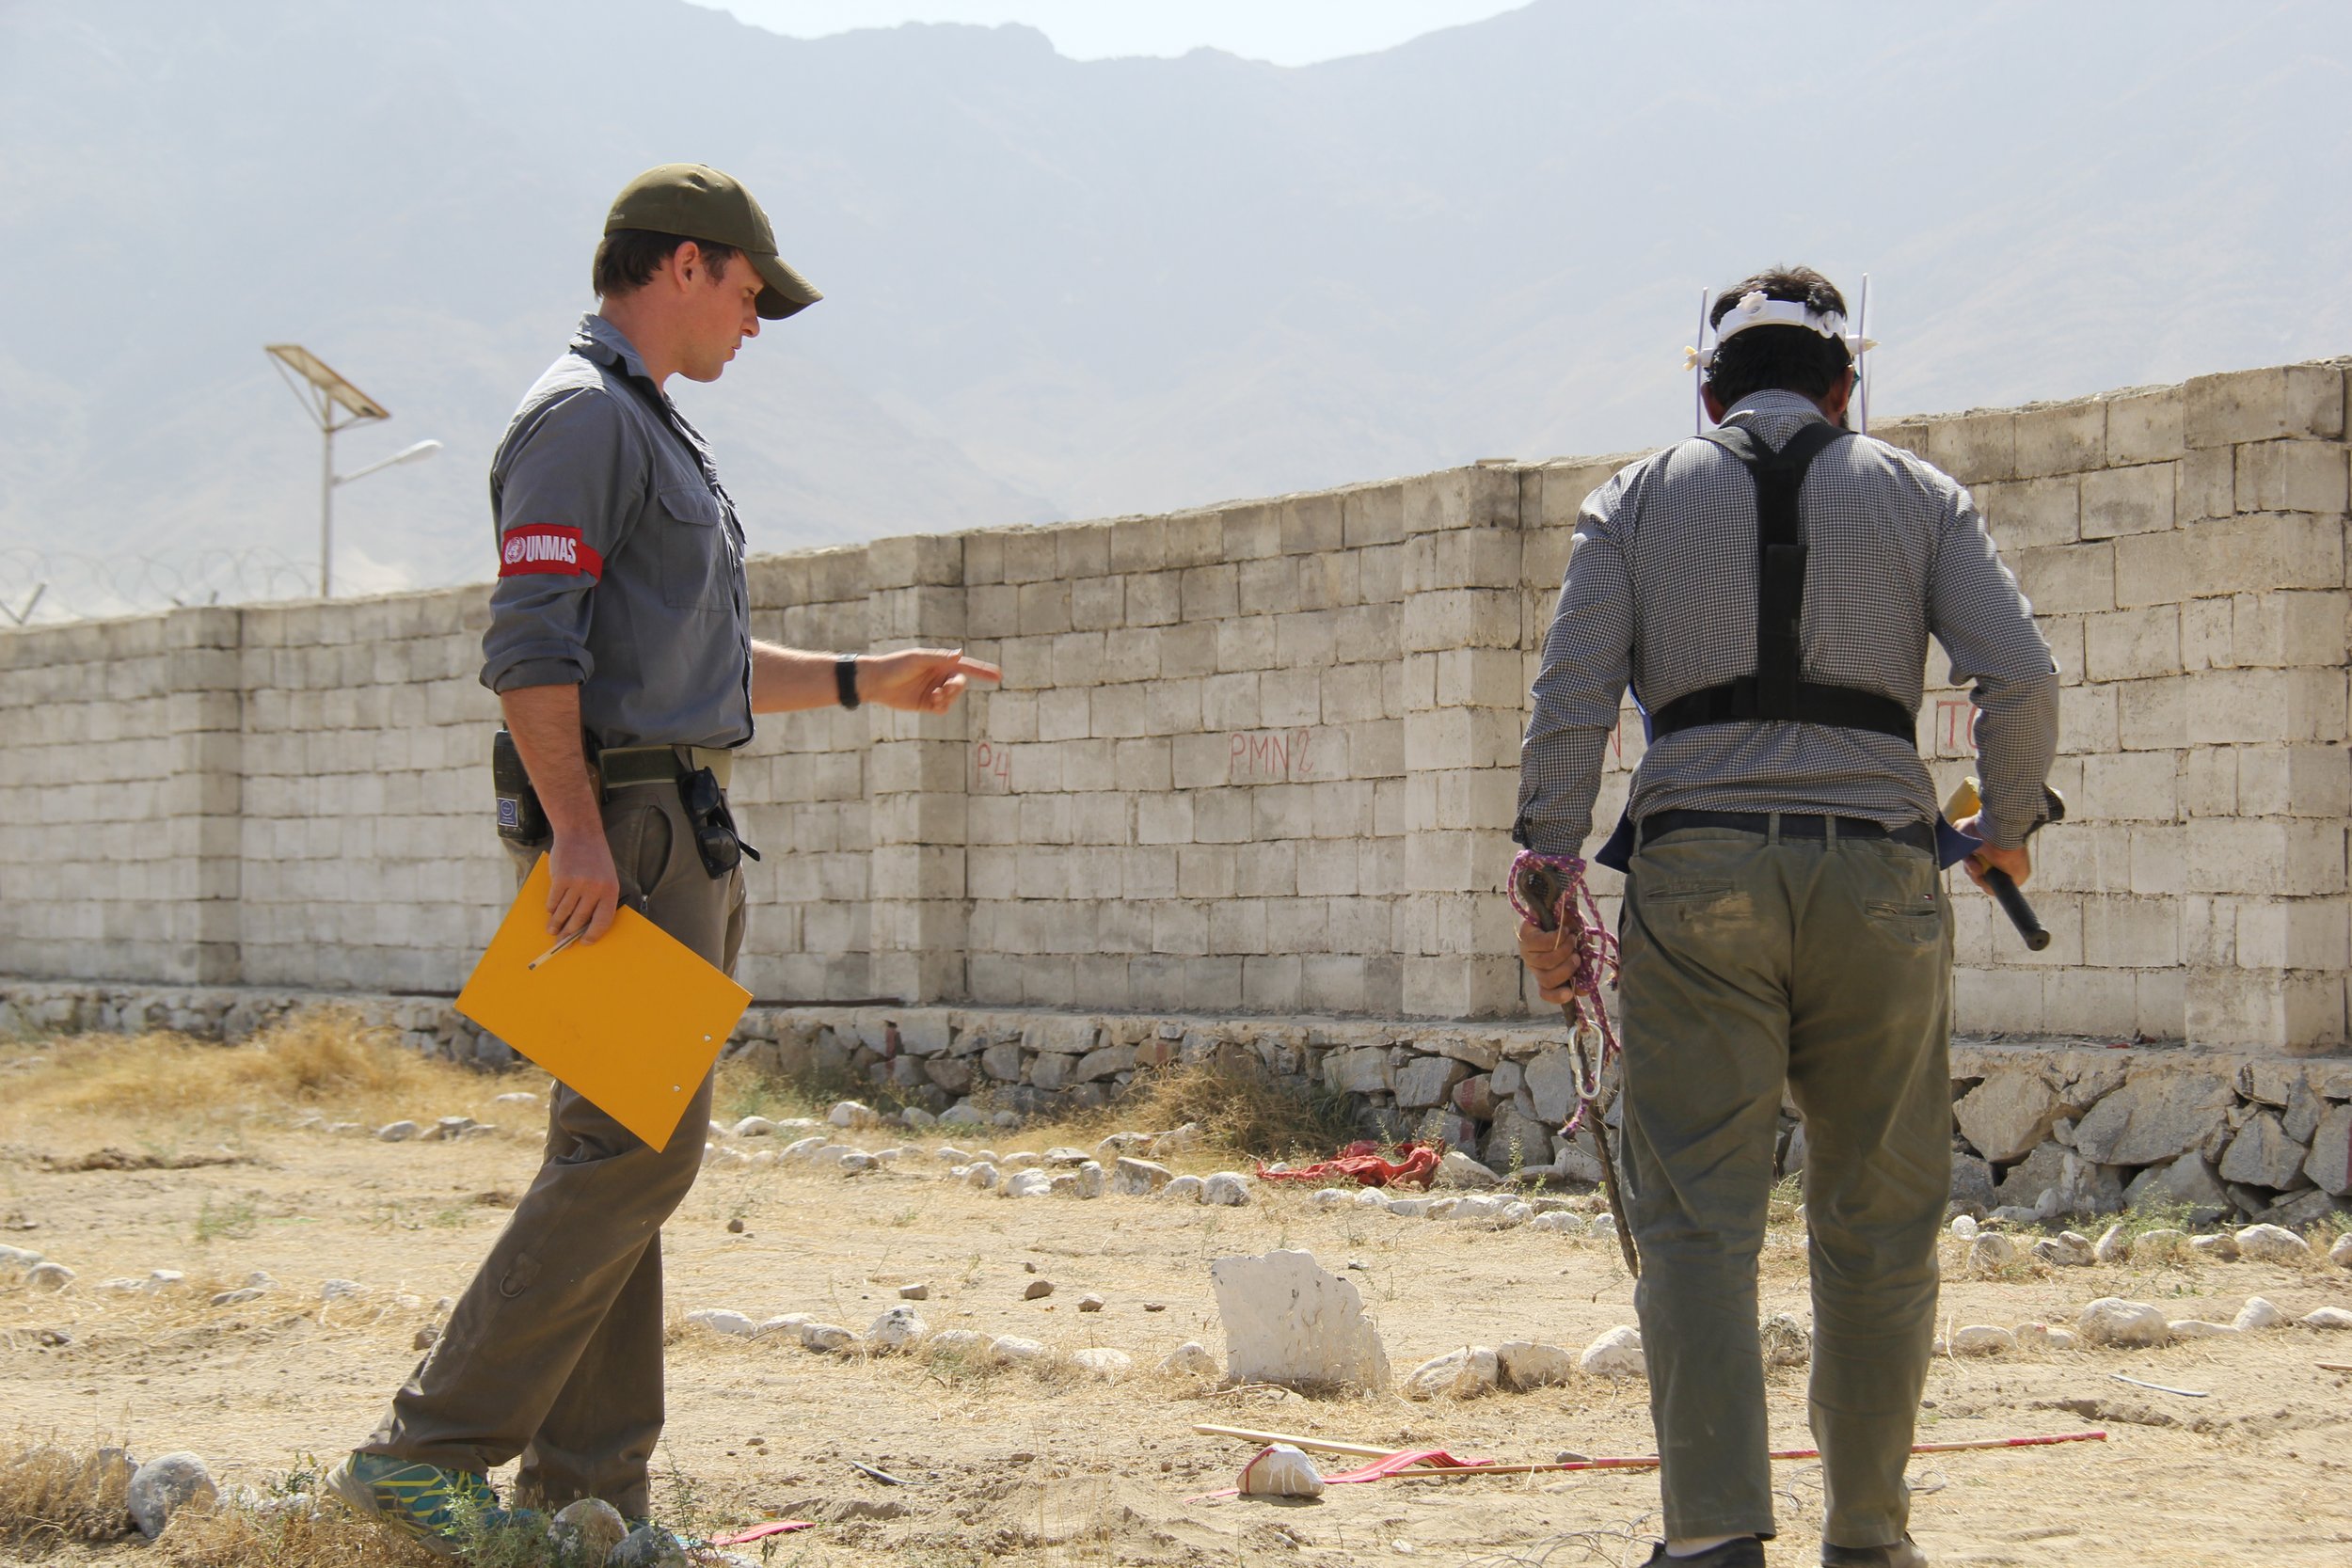  Two individuals, equipped with metal detectors, carefully scan a sandy area for mines against the backdrop of a high wall, exemplifying the hands-on aspect of Artios Global’s capacity development in mine action. 